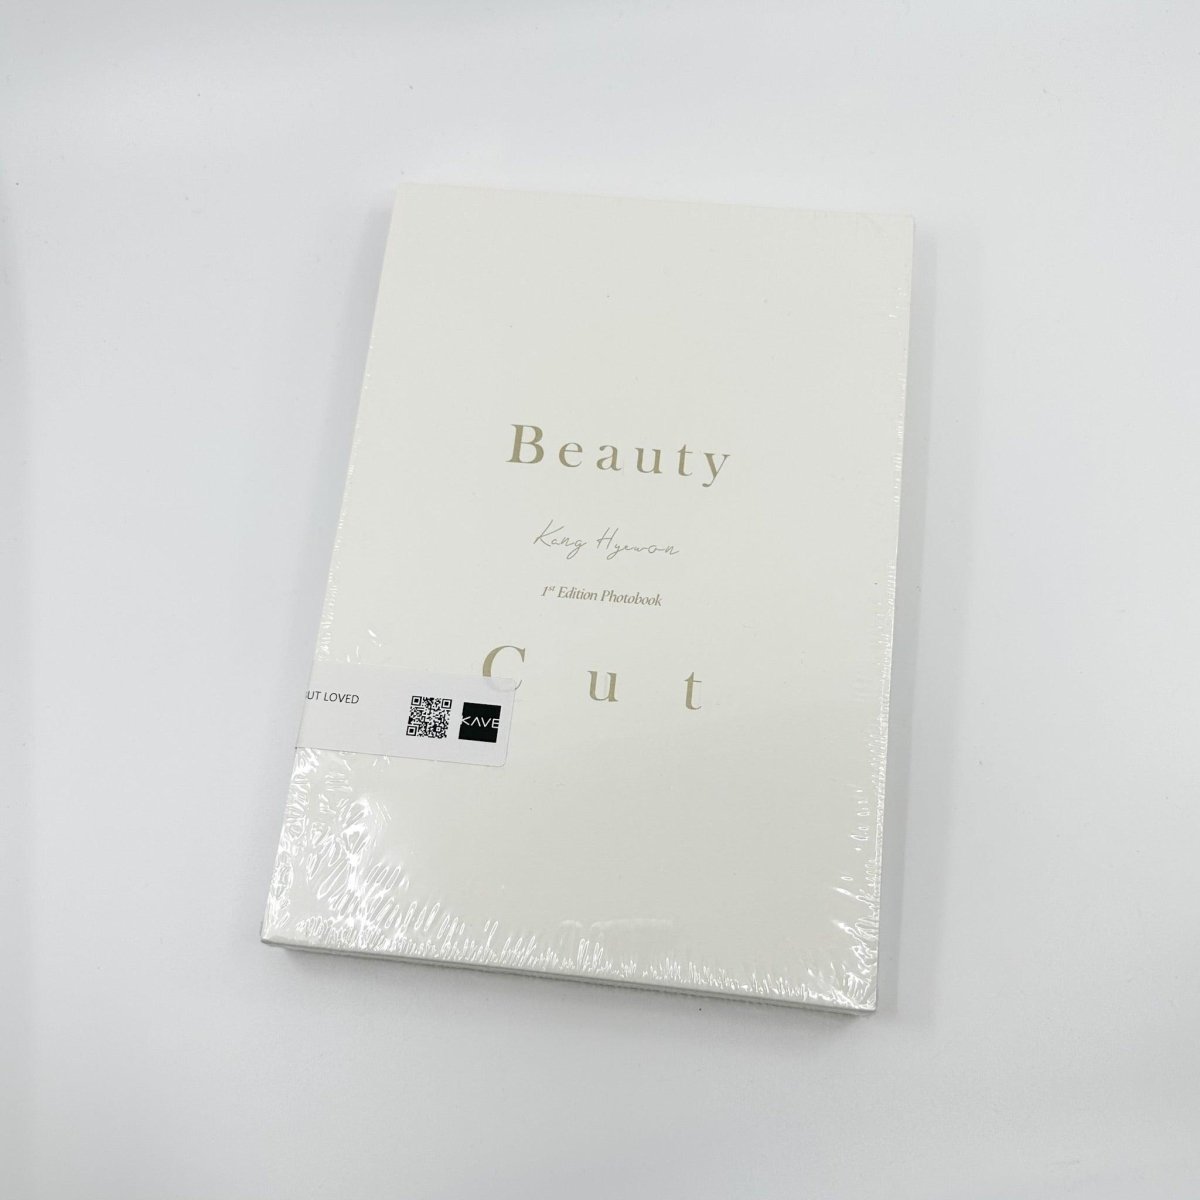 KANG HYEWON - 1st Edition Photobook [Beauty Cut] FLAWED A - KAVE SQUARE